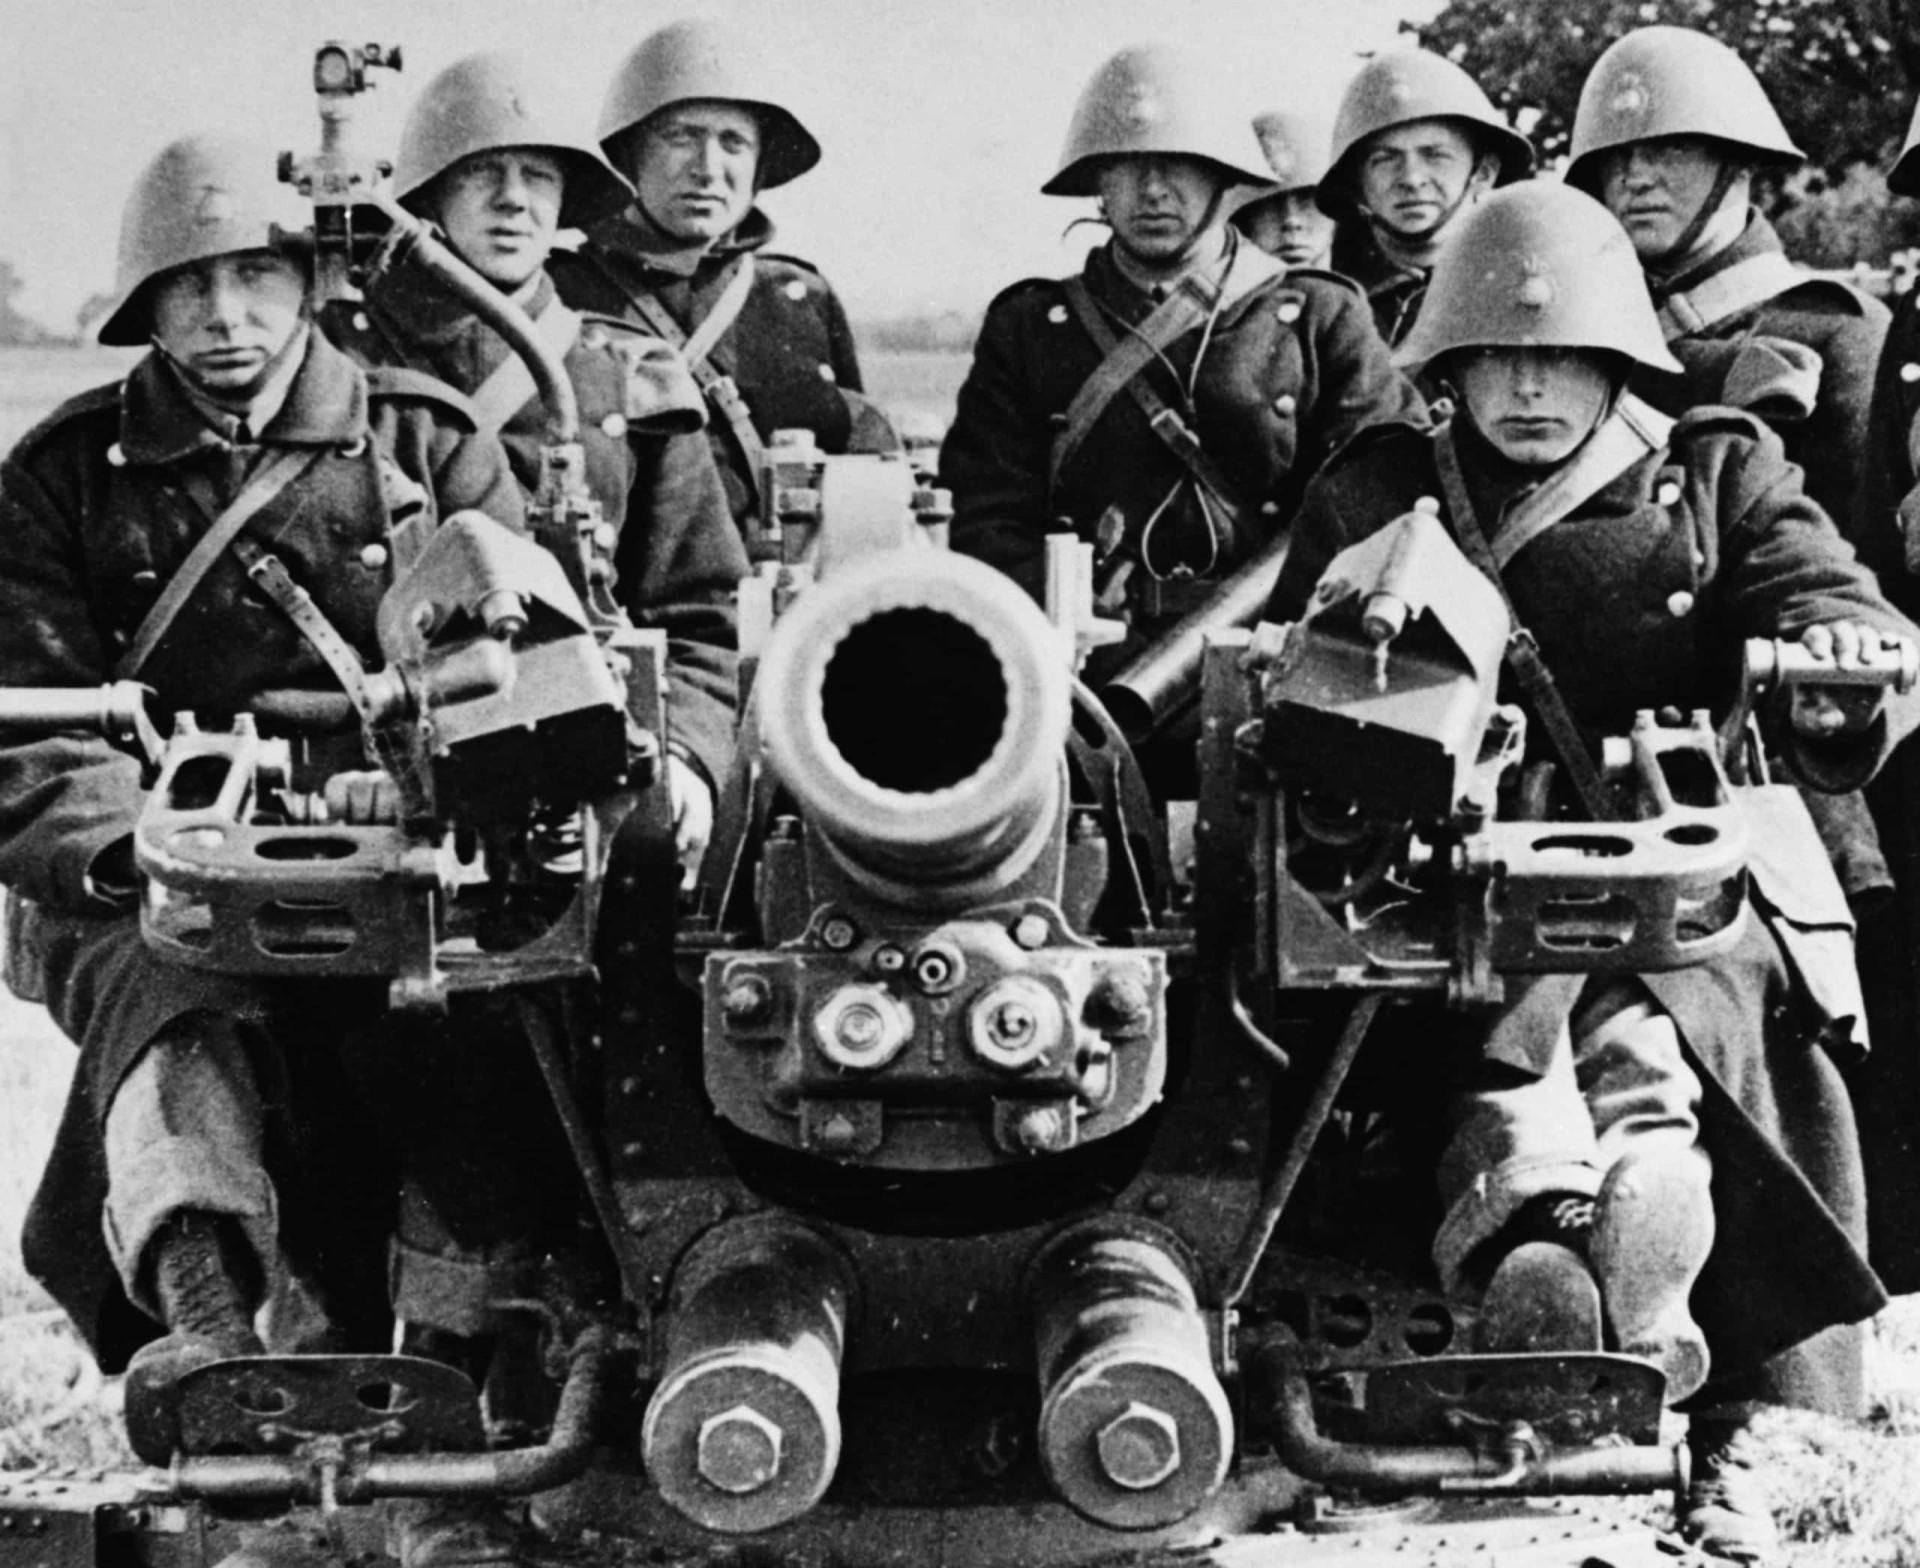 <p>In April 1940, Danish soldiers, lacking numbers and experience, bravely operate an anti-aircraft gun.</p><p><a href="https://www.msn.com/en-my/community/channel/vid-7xx8mnucu55yw63we9va2gwr7uihbxwc68fxqp25x6tg4ftibpra?cvid=94631541bc0f4f89bfd59158d696ad7e">Follow us and access great exclusive content every day</a></p>